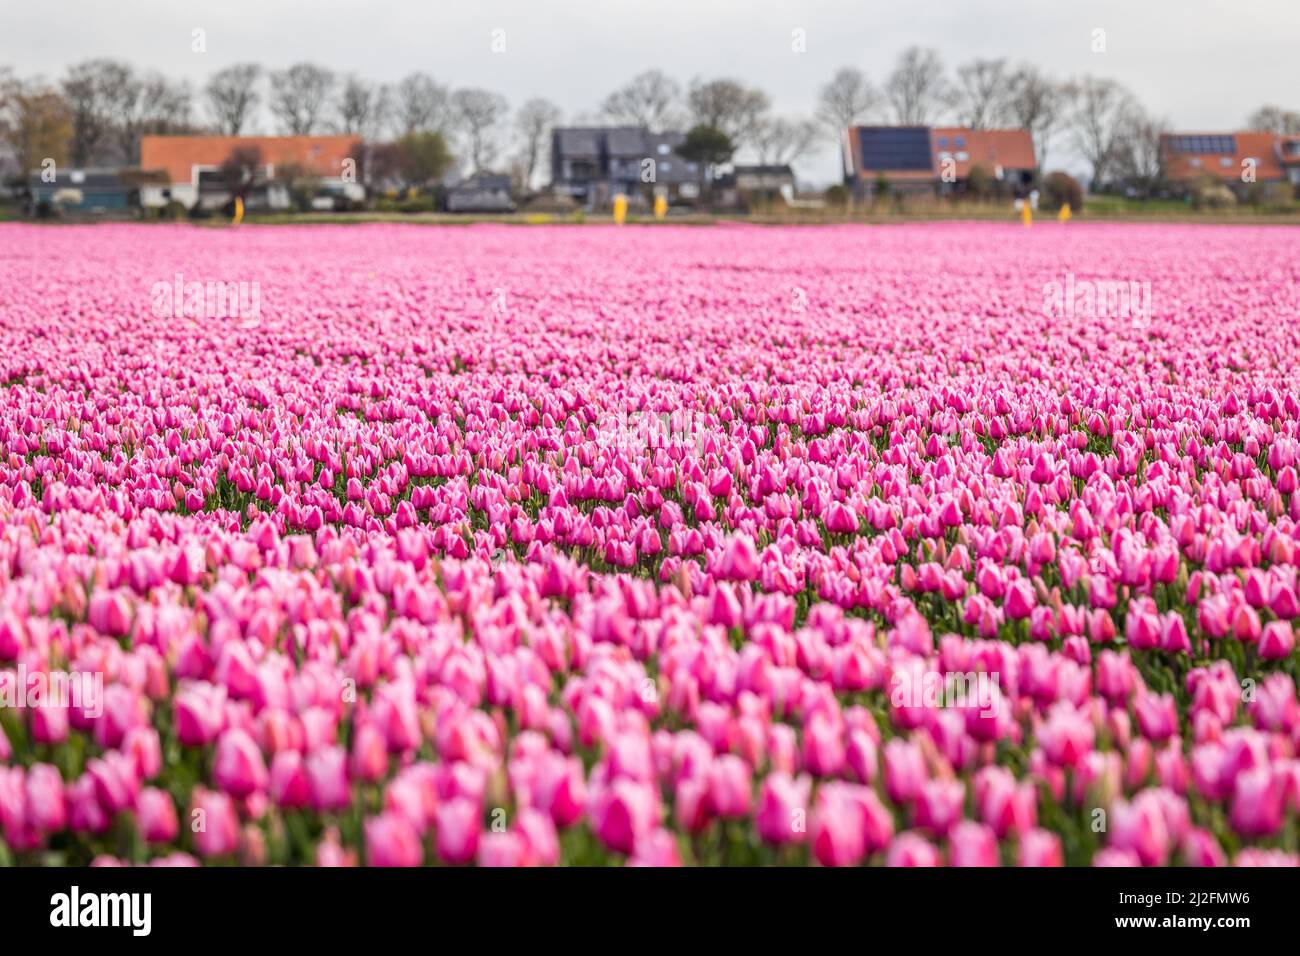 2022-03-31 08:10:38 31-03-2022, Zuid-Beijerland - Tulip fields in bloom on a field in Zuid-Beijerland. The tulips bloom early this year due to the beautiful sunny weather. Photo: ANP / Hollandse Hoogte / Jeffrey Groeneweg netherlands out - belgium out Stock Photo